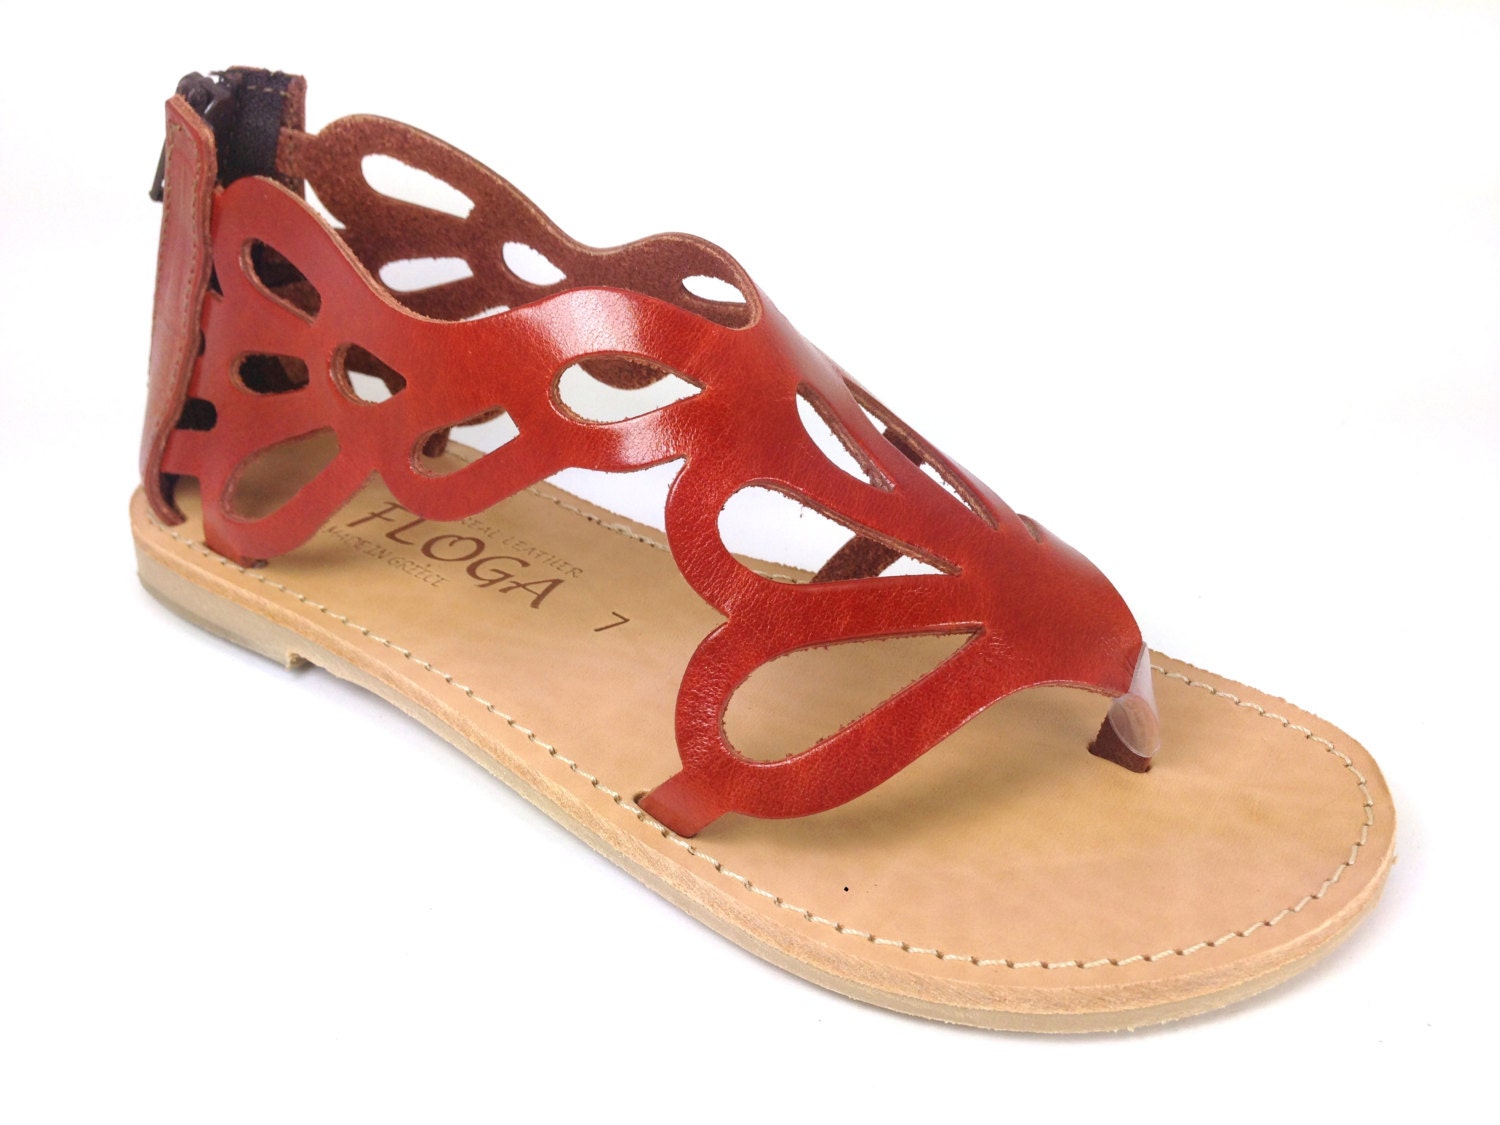 Women's Ancient Greek style leather sandals Chloe by FlogaNewYork